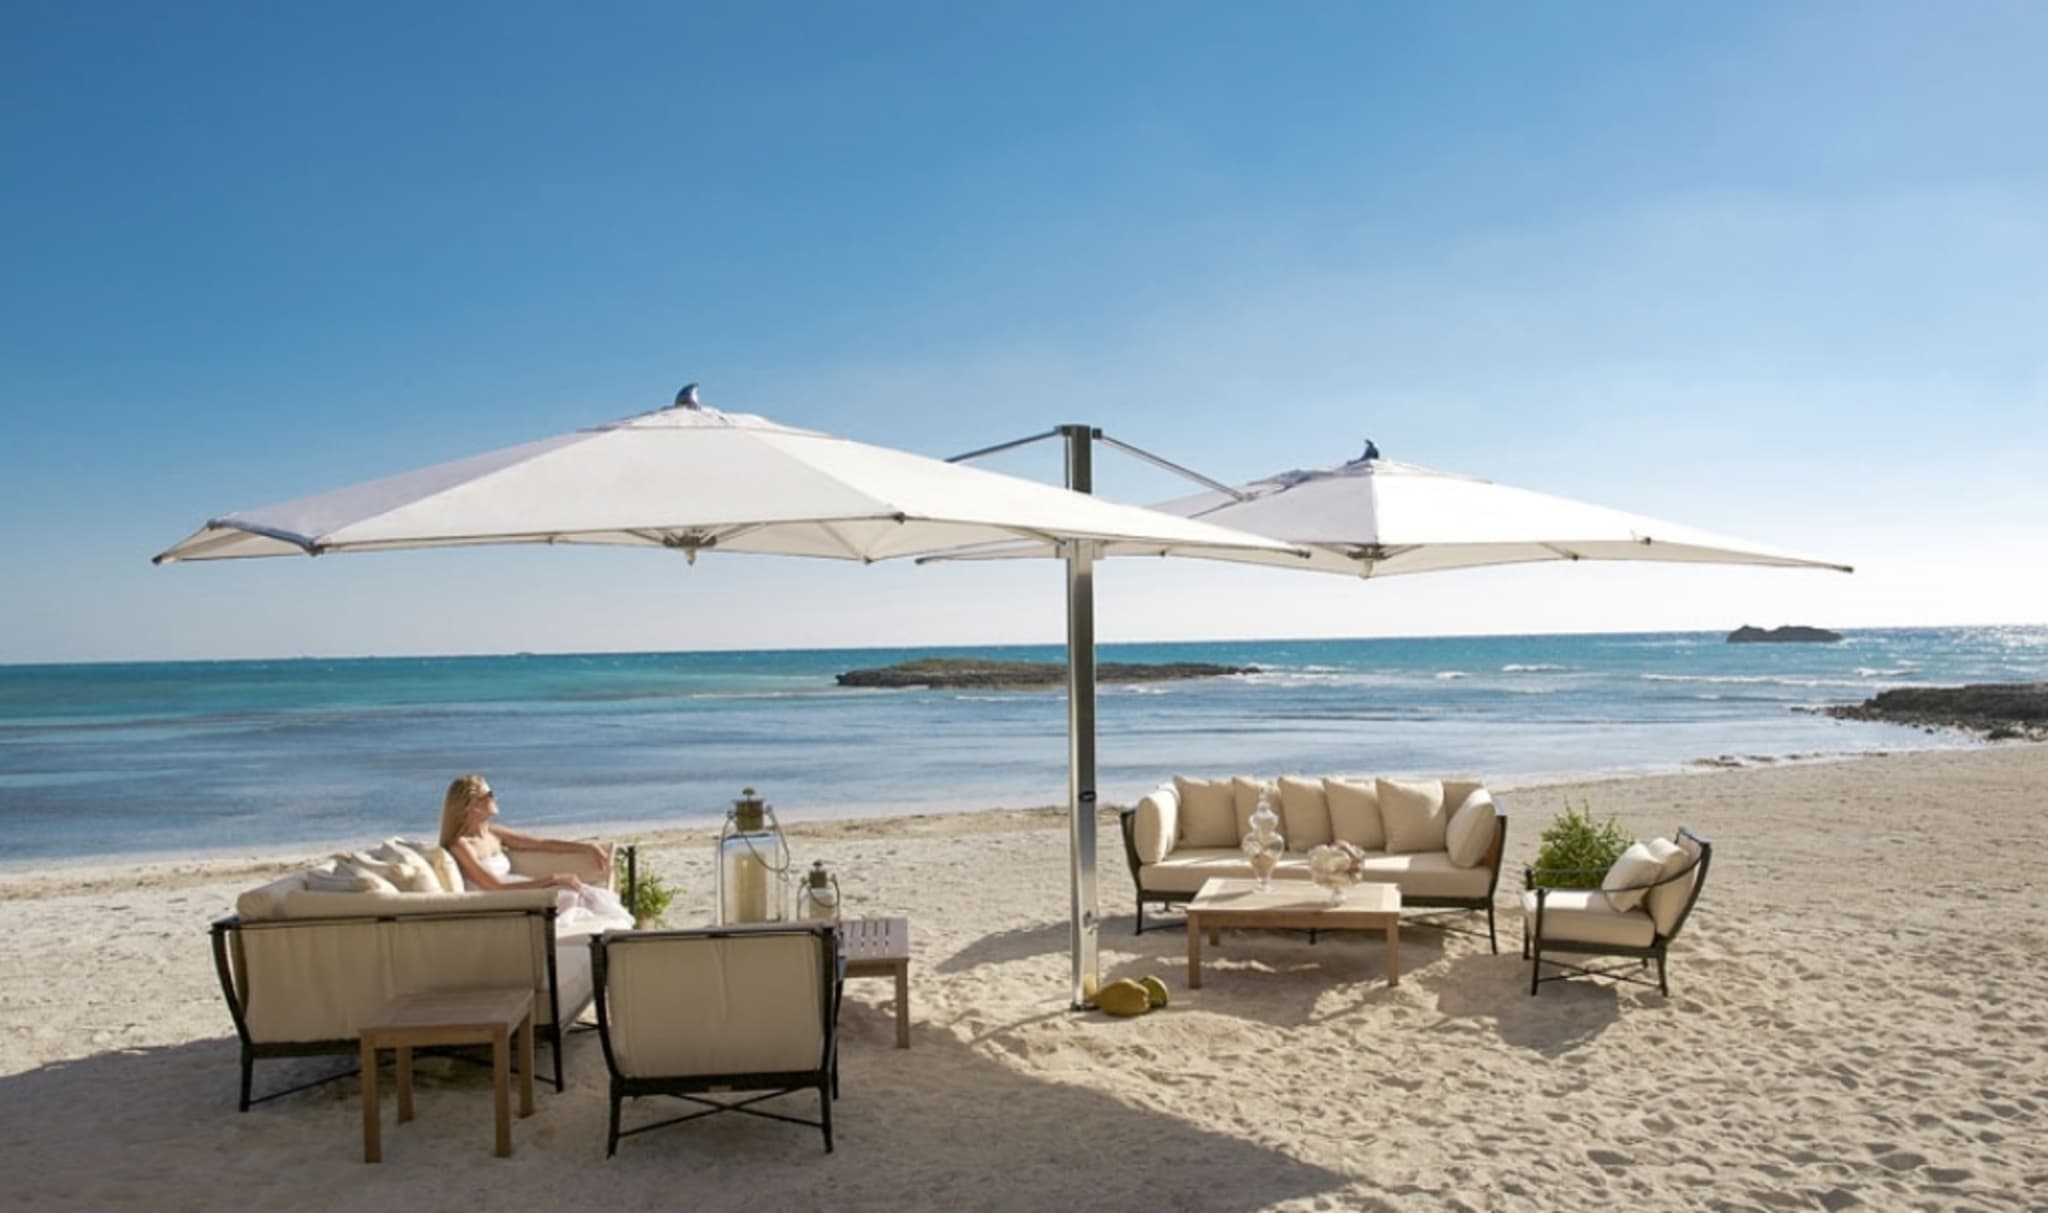 <p>Thanks to origins in the marine industry, Tuuci umbrellas are meticulously crafted with nautical engineering principles to perform in any environment. High performance meets high style in every Tuuci piece, including everything from umbrellas and pavilions to umbrella covers and accessories.</p>